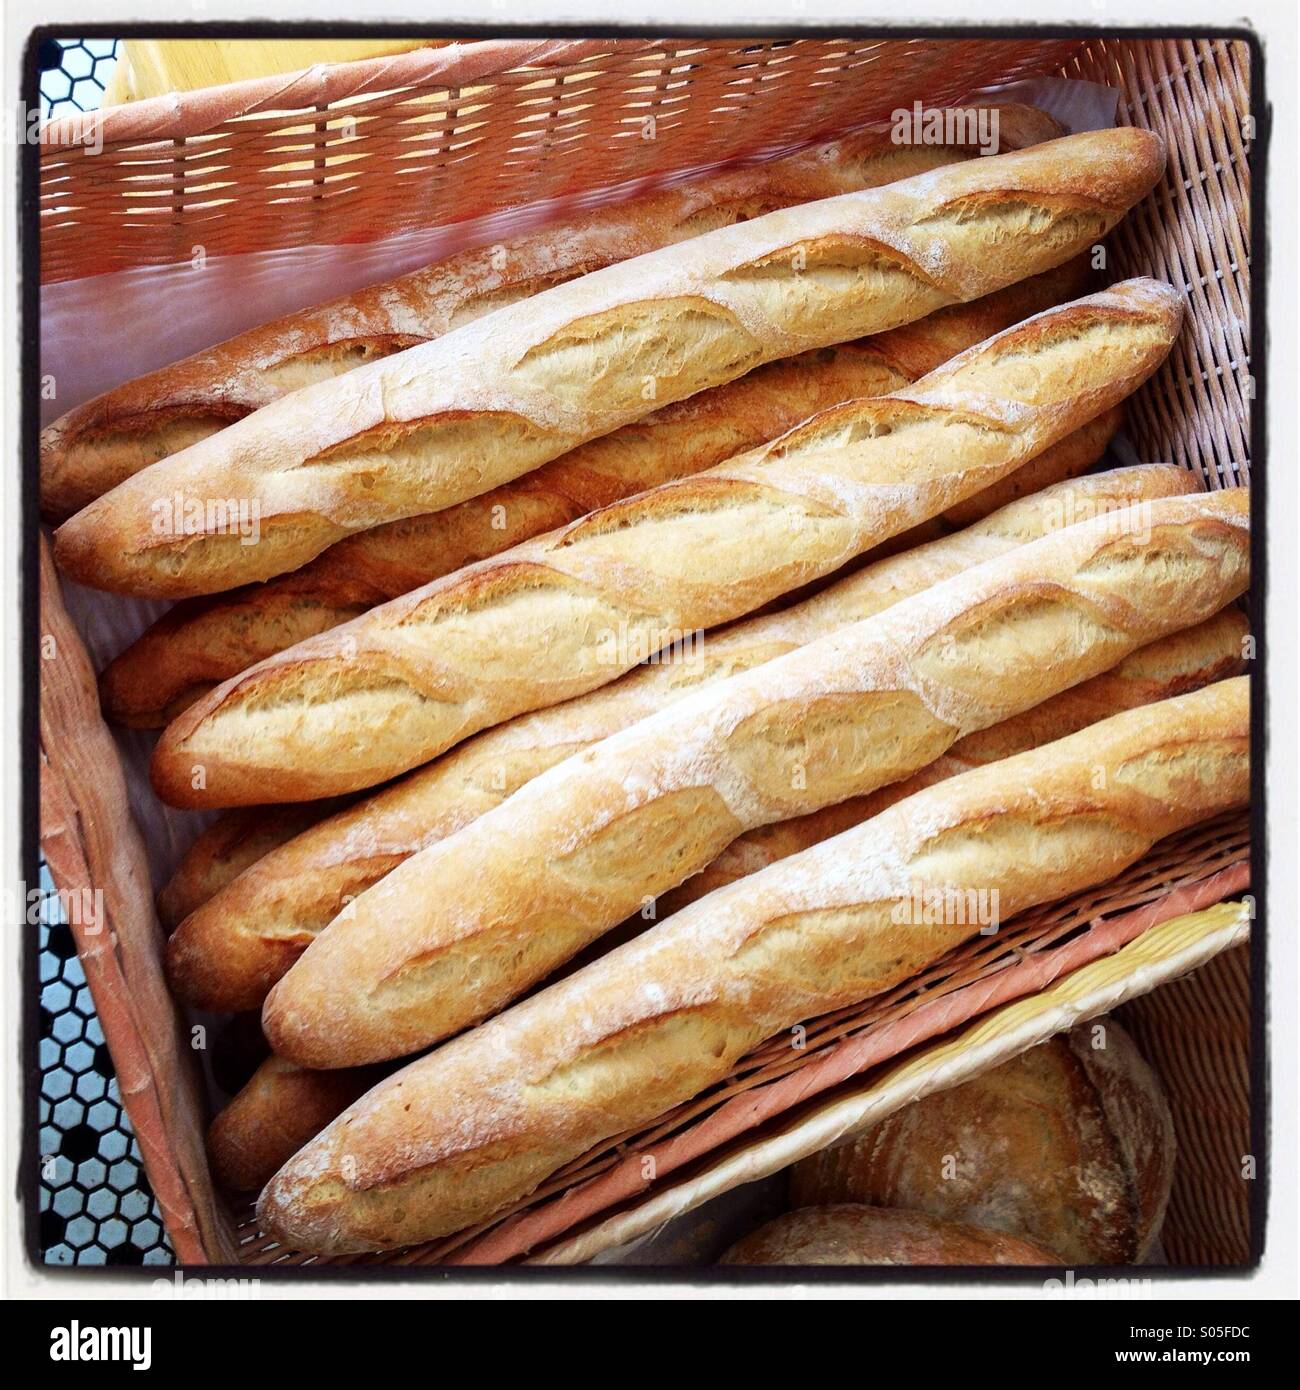 A box of baguettes at a bakery Stock Photo